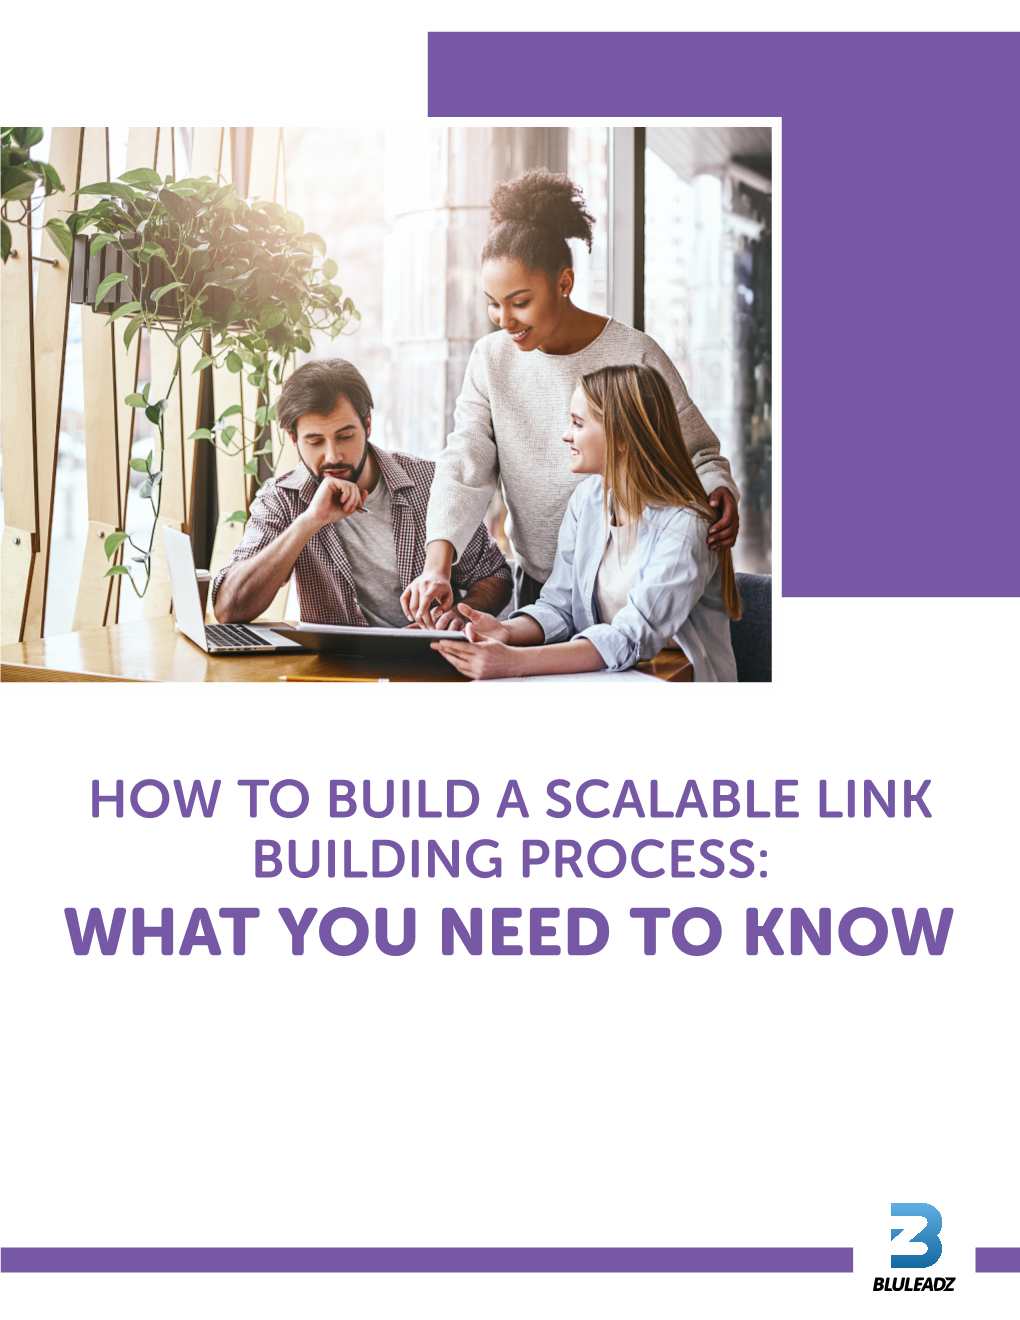 What You Need to Know How to Build a Scalable Link Building Process: What You Need to Know